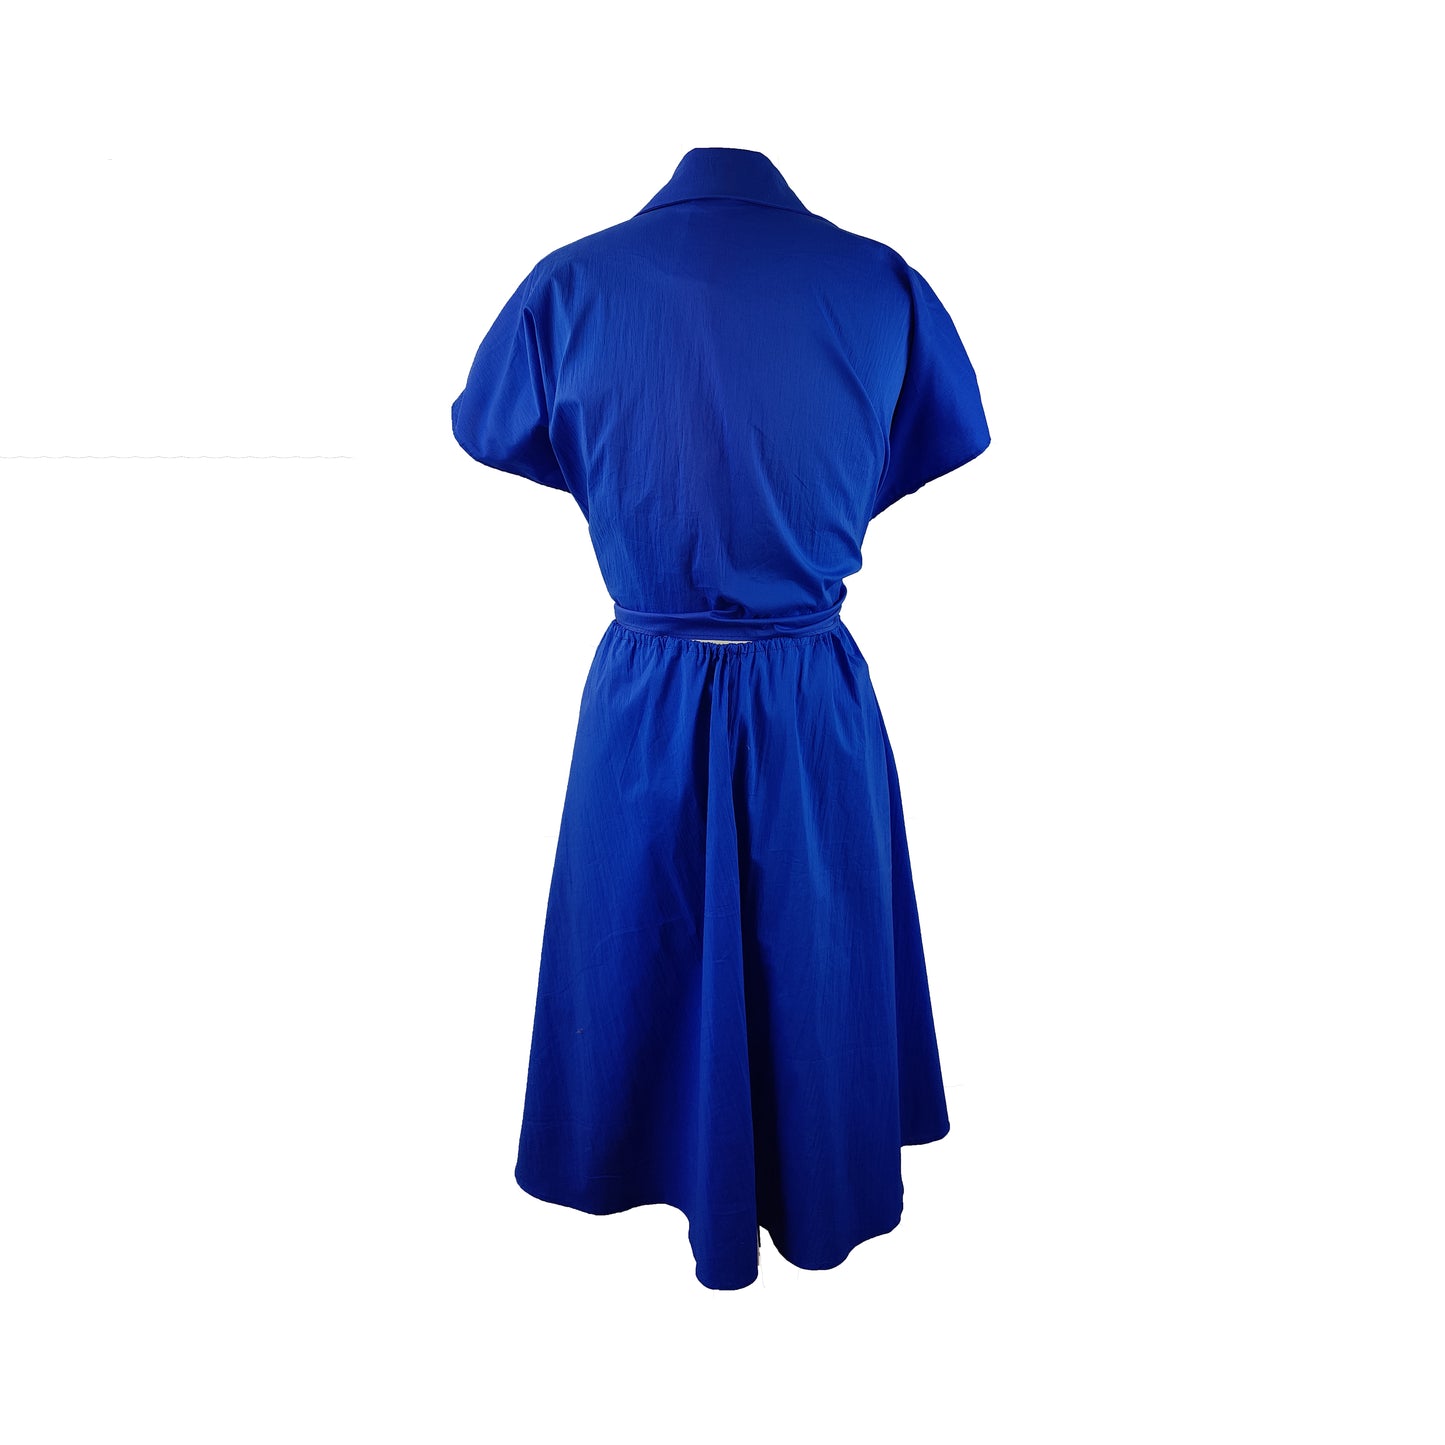 Back of cupro dress in cobalt blue with button detailing and adjustable waist styled as belt